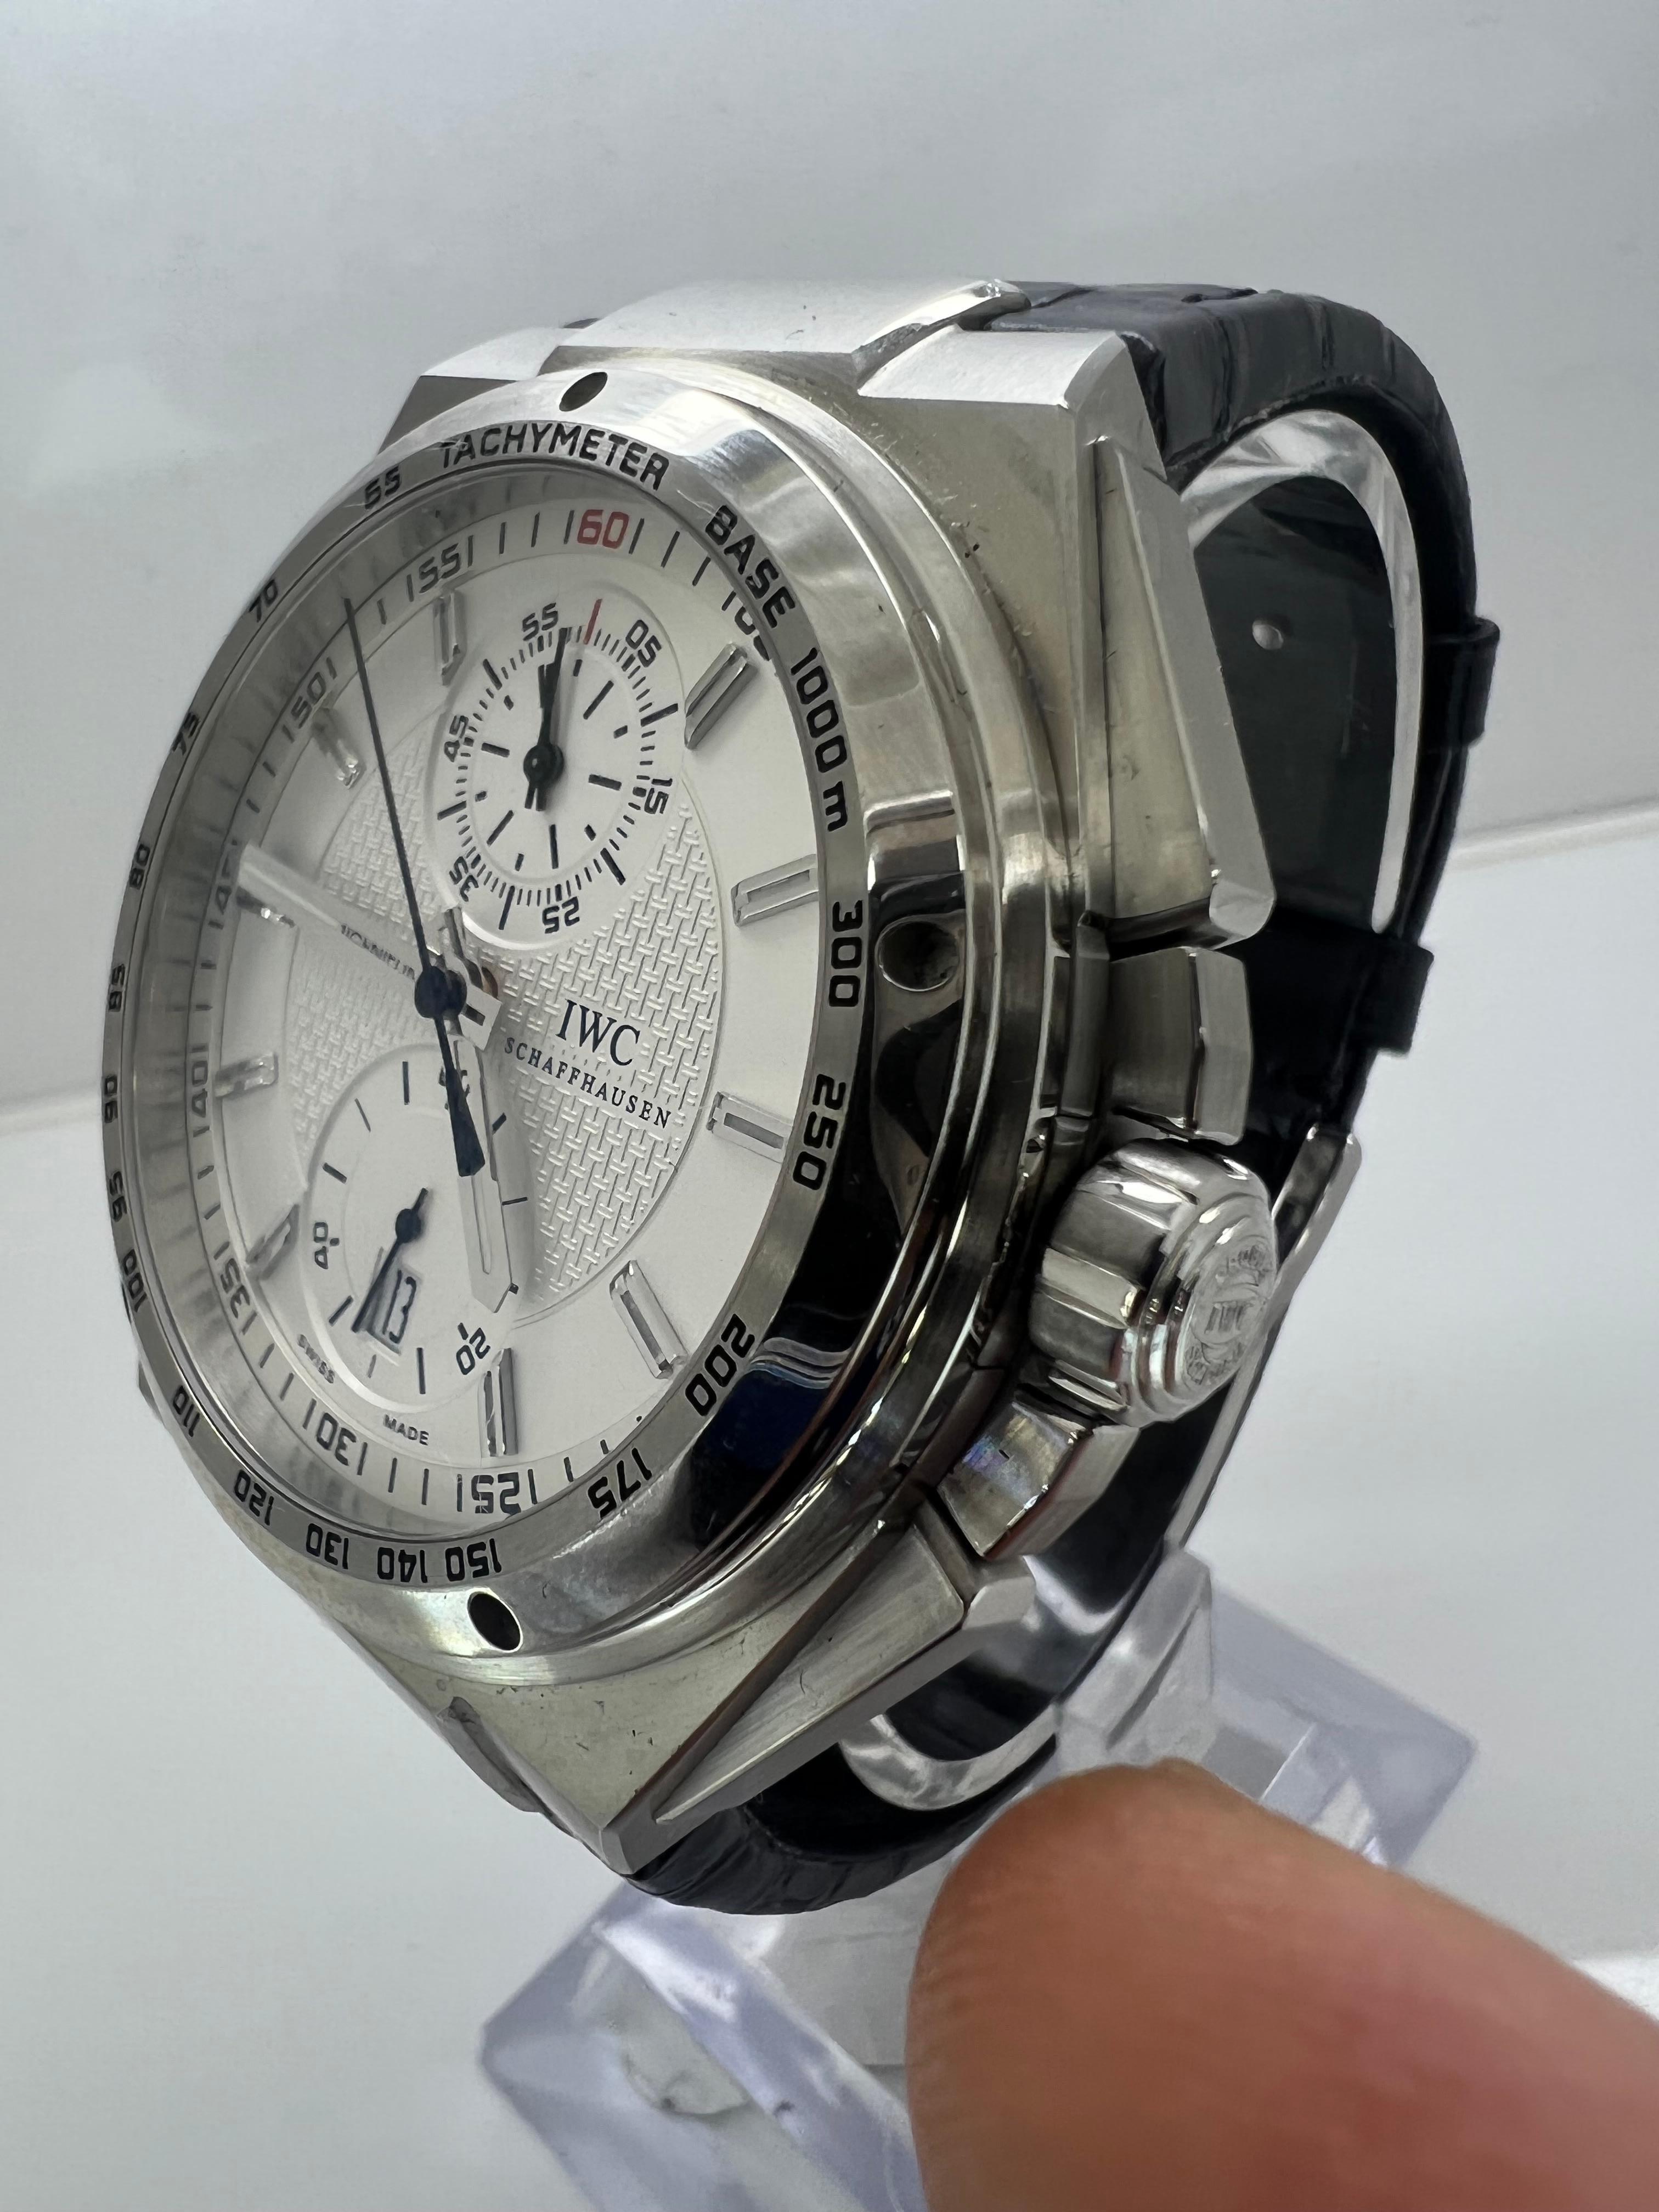 IWC Big Ingenieur Chronograph Automatic White Dial  Men's Watch 378405

Brand new unworn!!

complete set box papers tags

BRANDIWC
SERIES LABEL Big Ingenieur Pilot Chronograph
GENDER Men's
MODELIW378405
WATCH LABEL Swiss Made
MOVEMENT